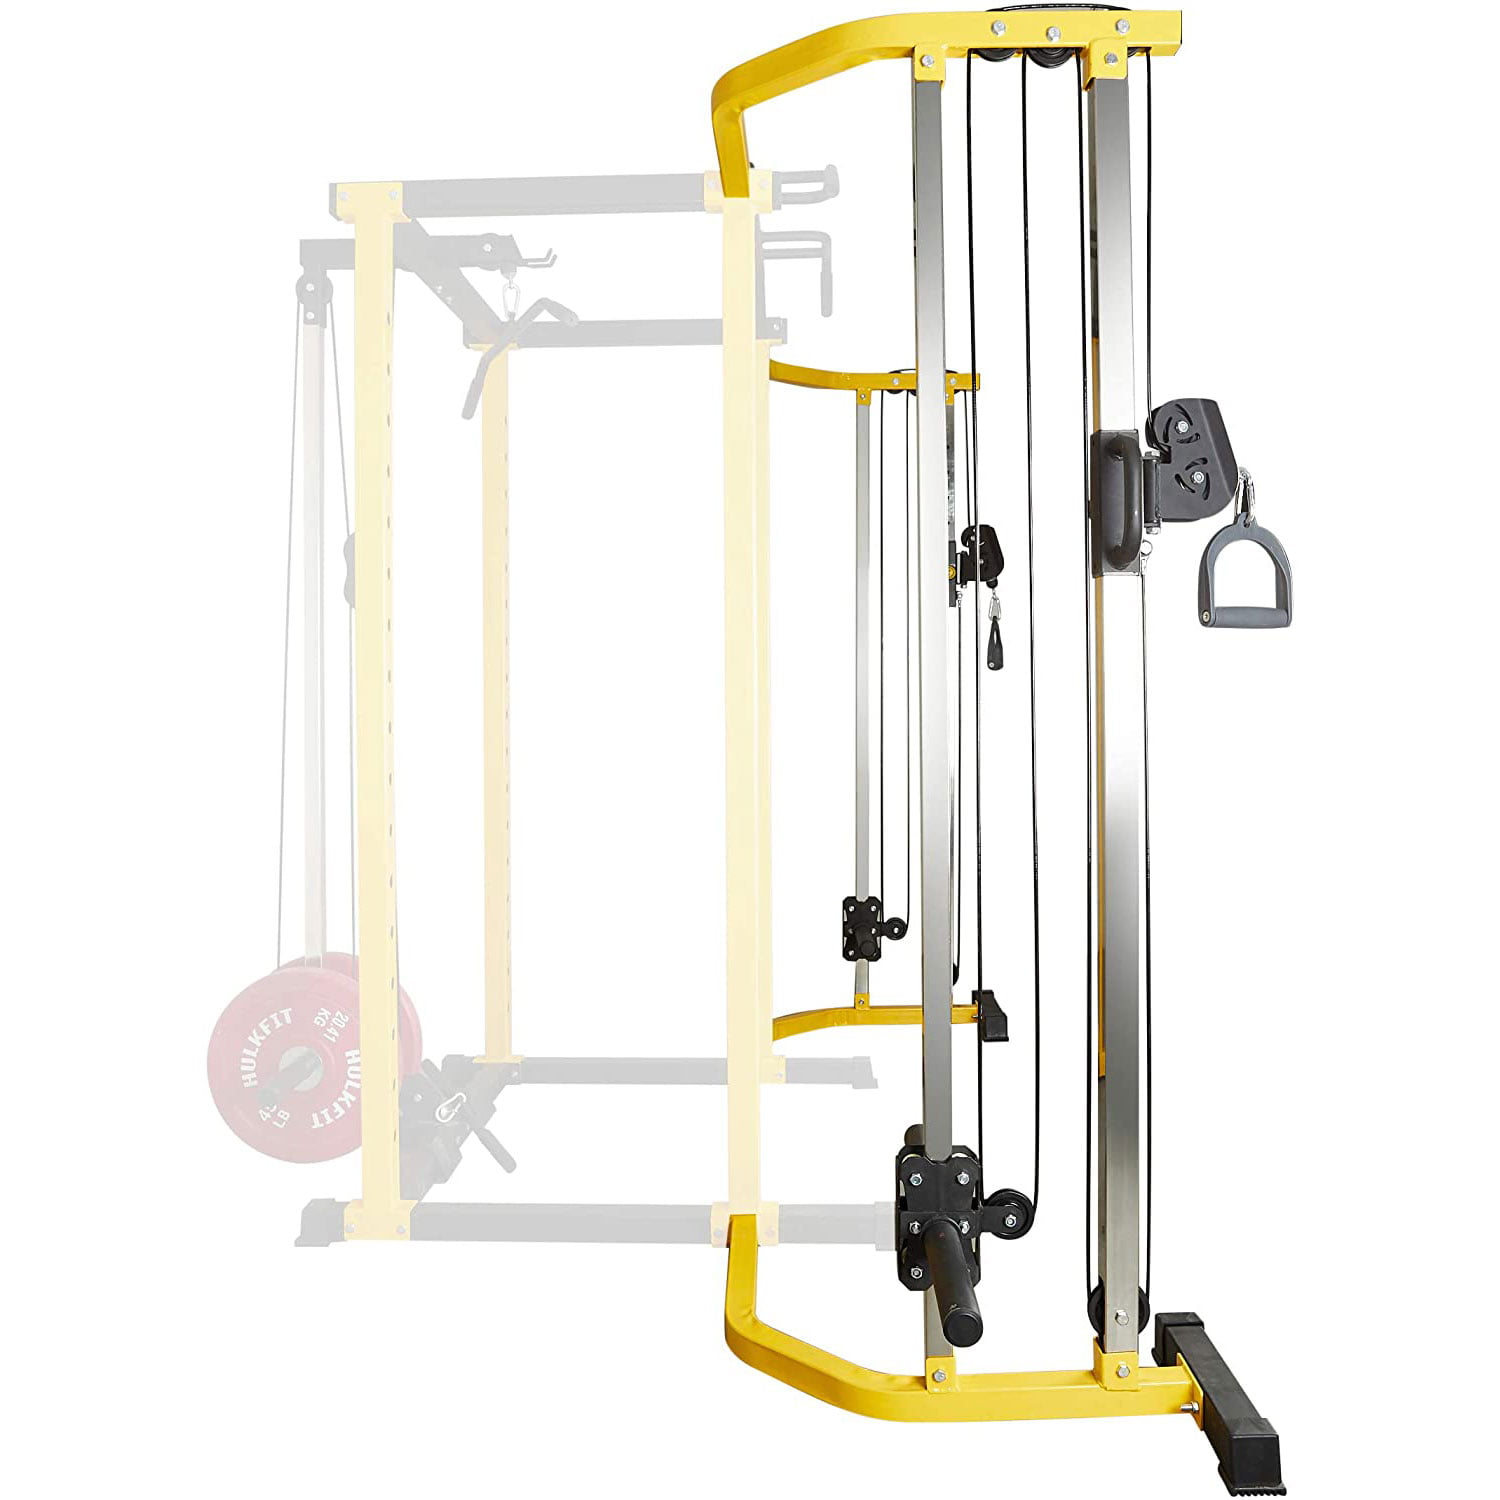 scared Moment Intervene HulkFit Cable Crossover Attachment Multi-Function Adjustable Exercise Power  Cage, 1000-Pound Capacity, Yellow - Walmart.com